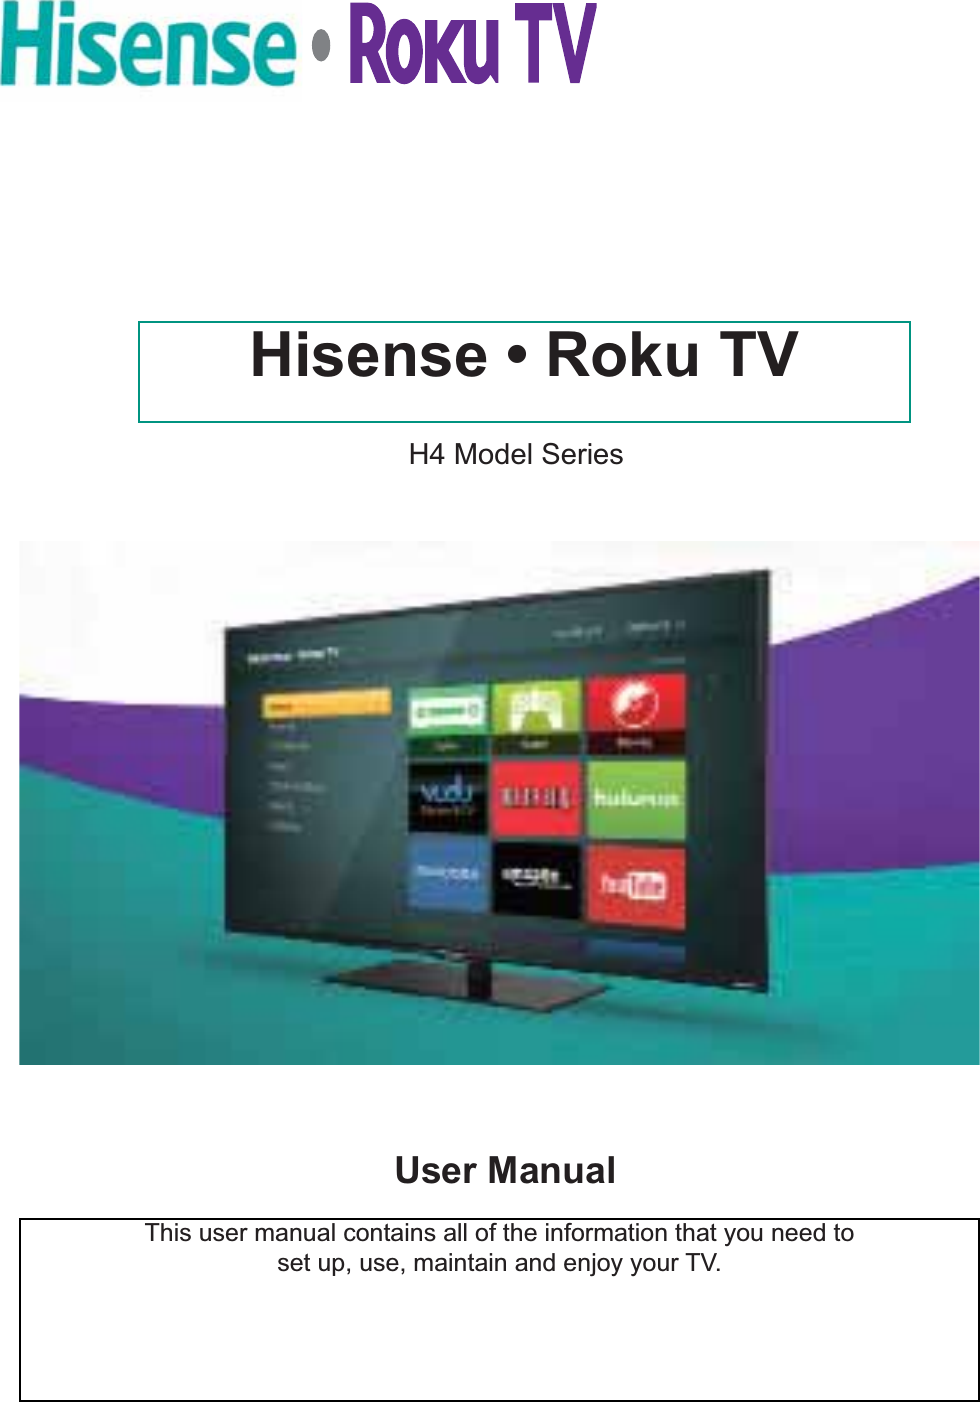 This user manual contains all of the information that you need to set up, use, maintain and enjoy your TV.            H4 Model Series Hisense • Roku TVUser Manual